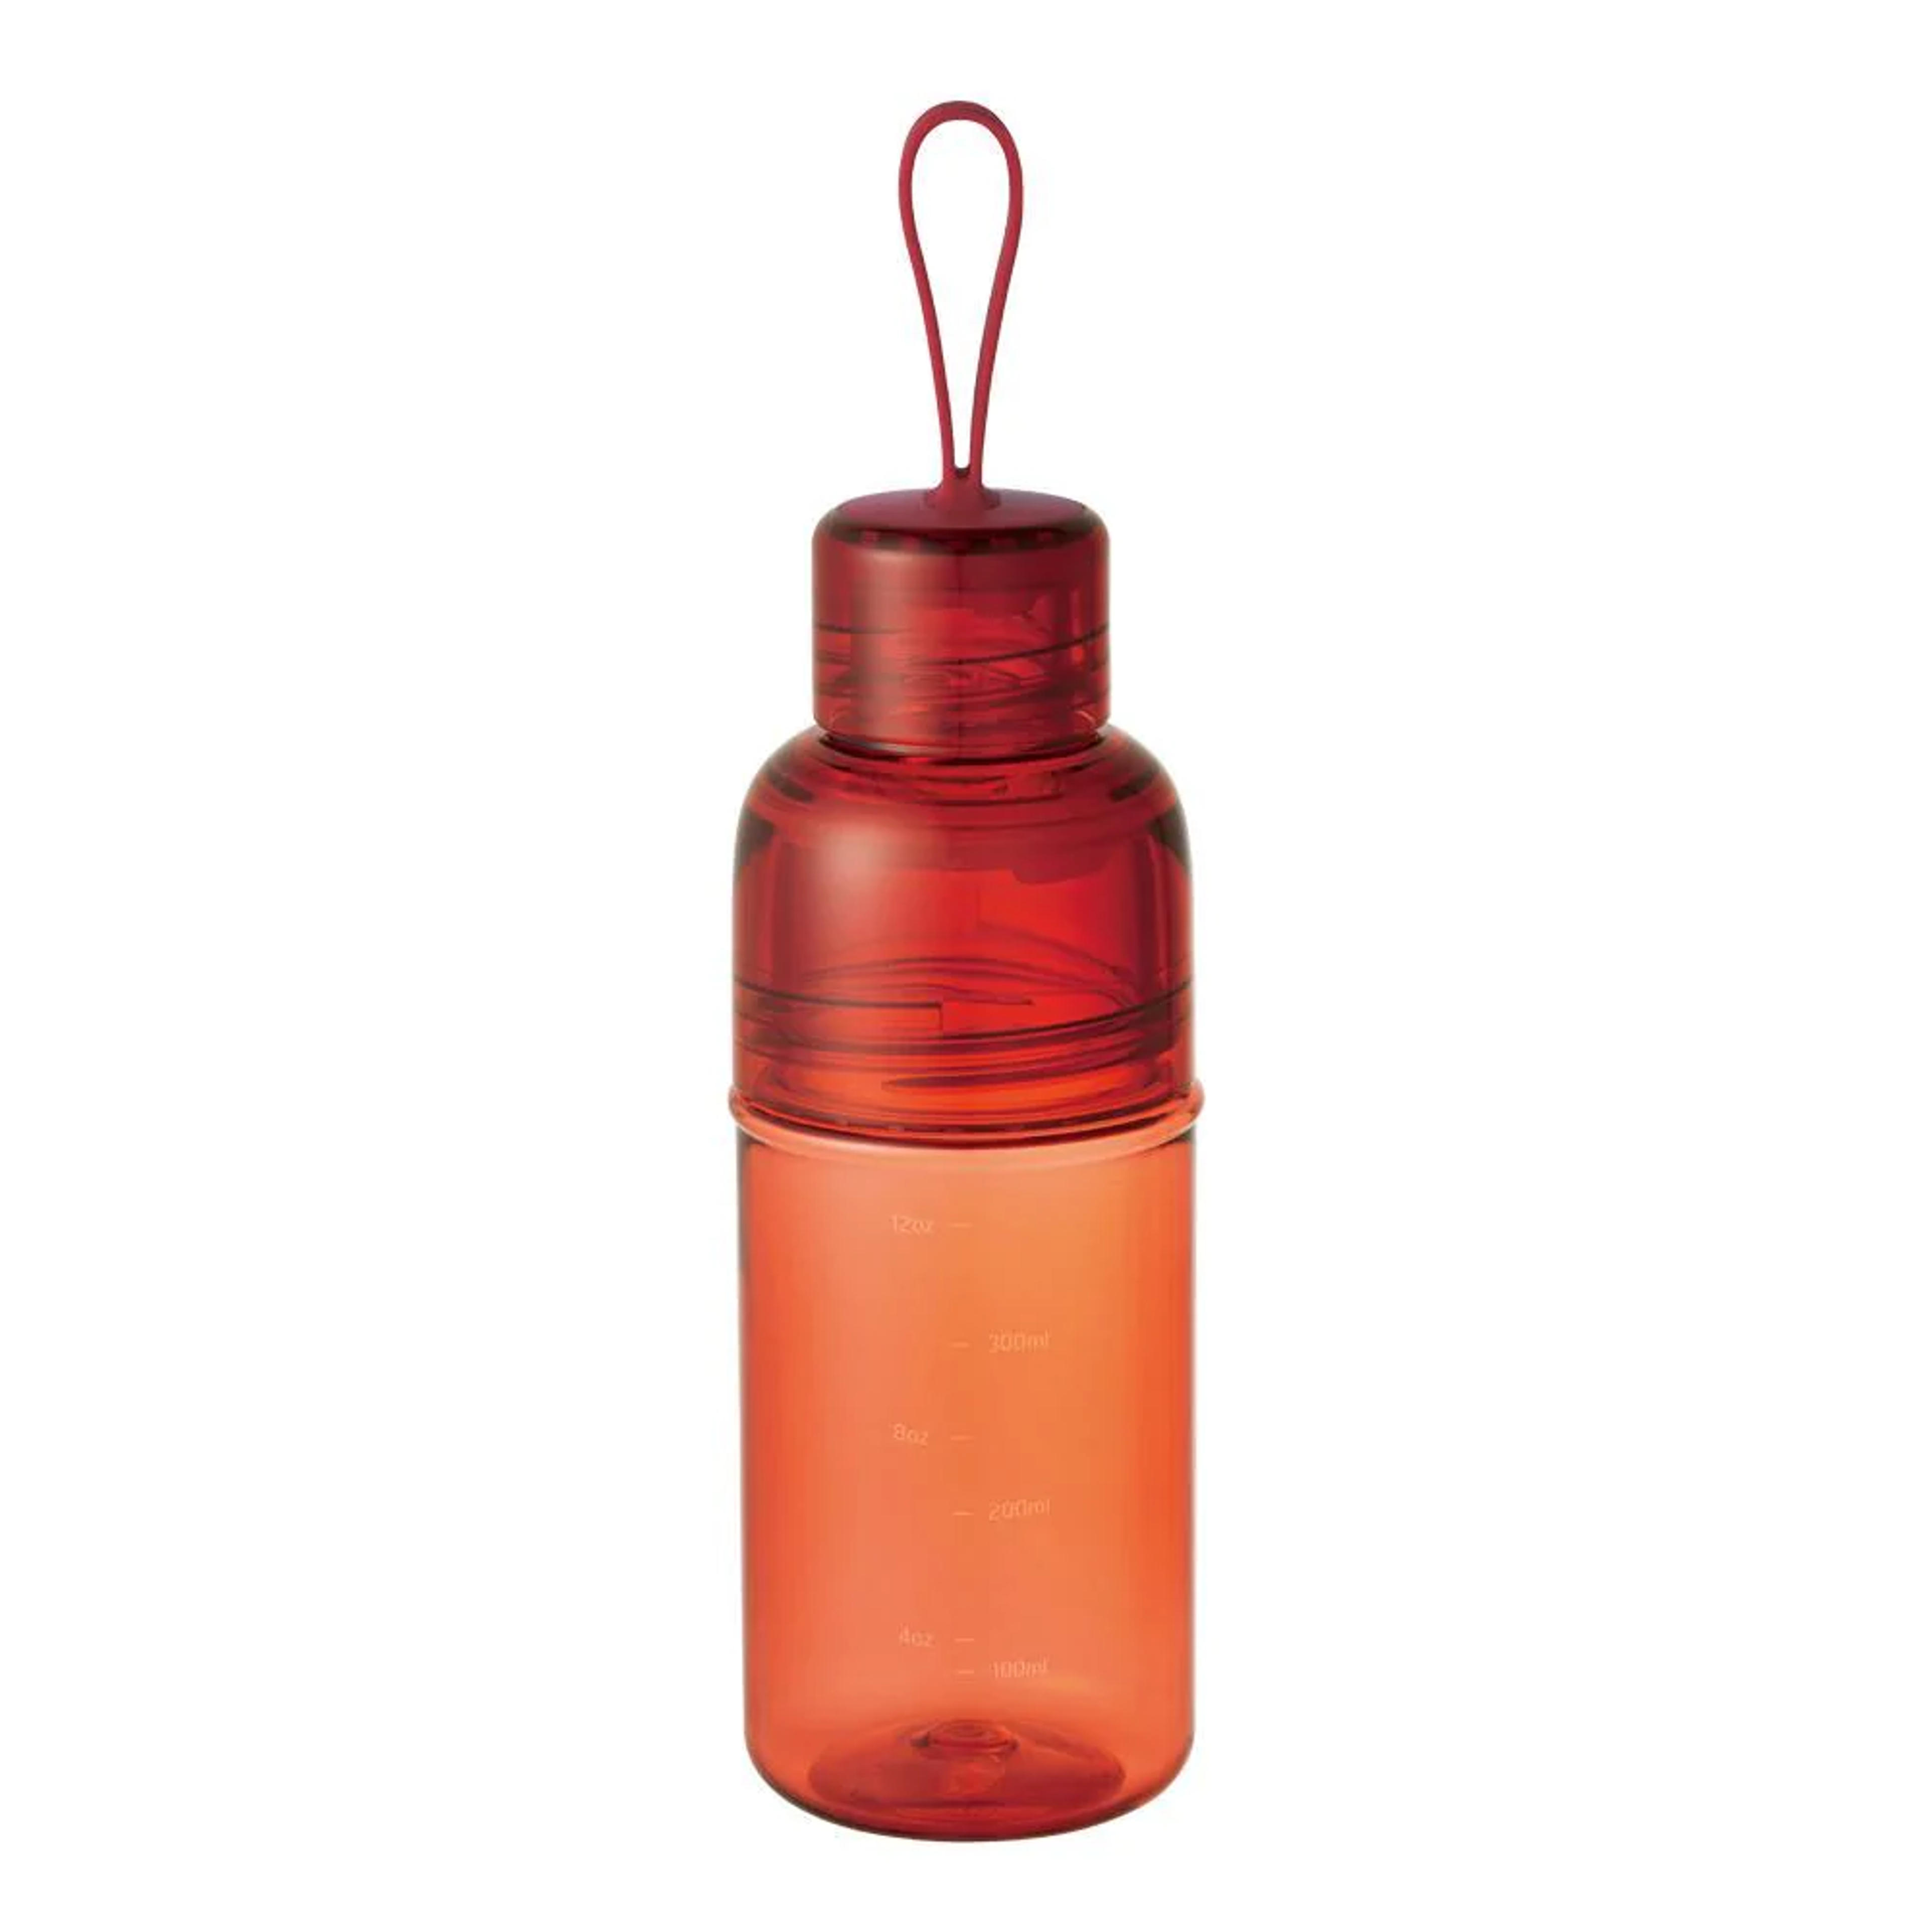 WORKOUT BOTTLE 480ml / 16oz - red